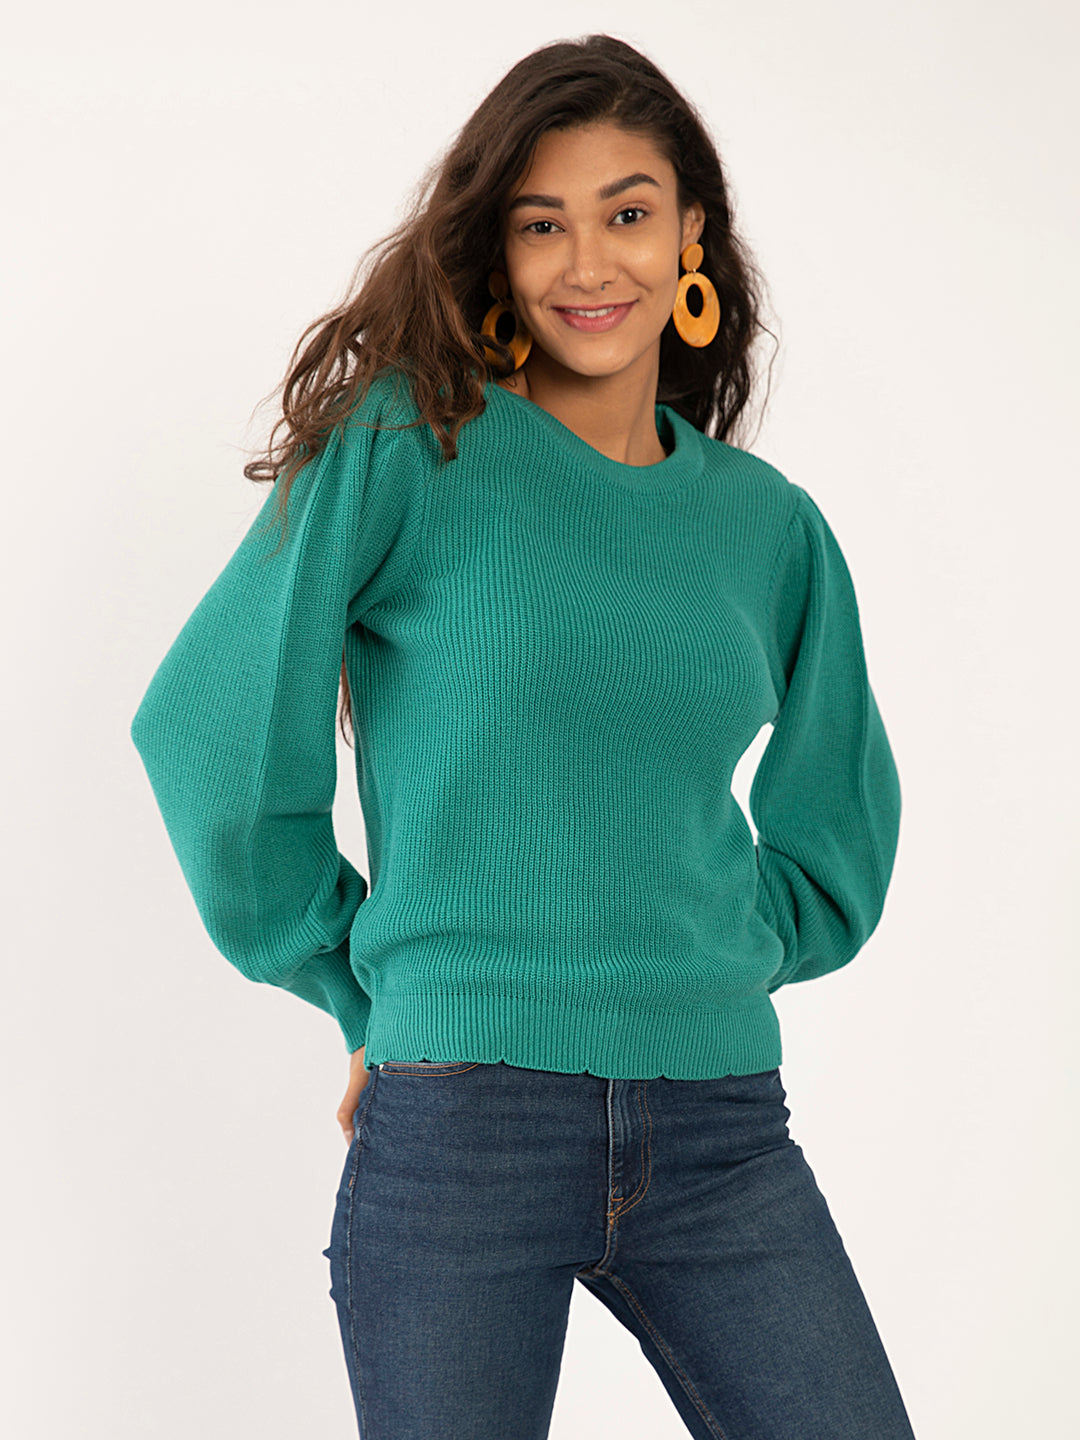 Green Solid Regular Sweaters For Women